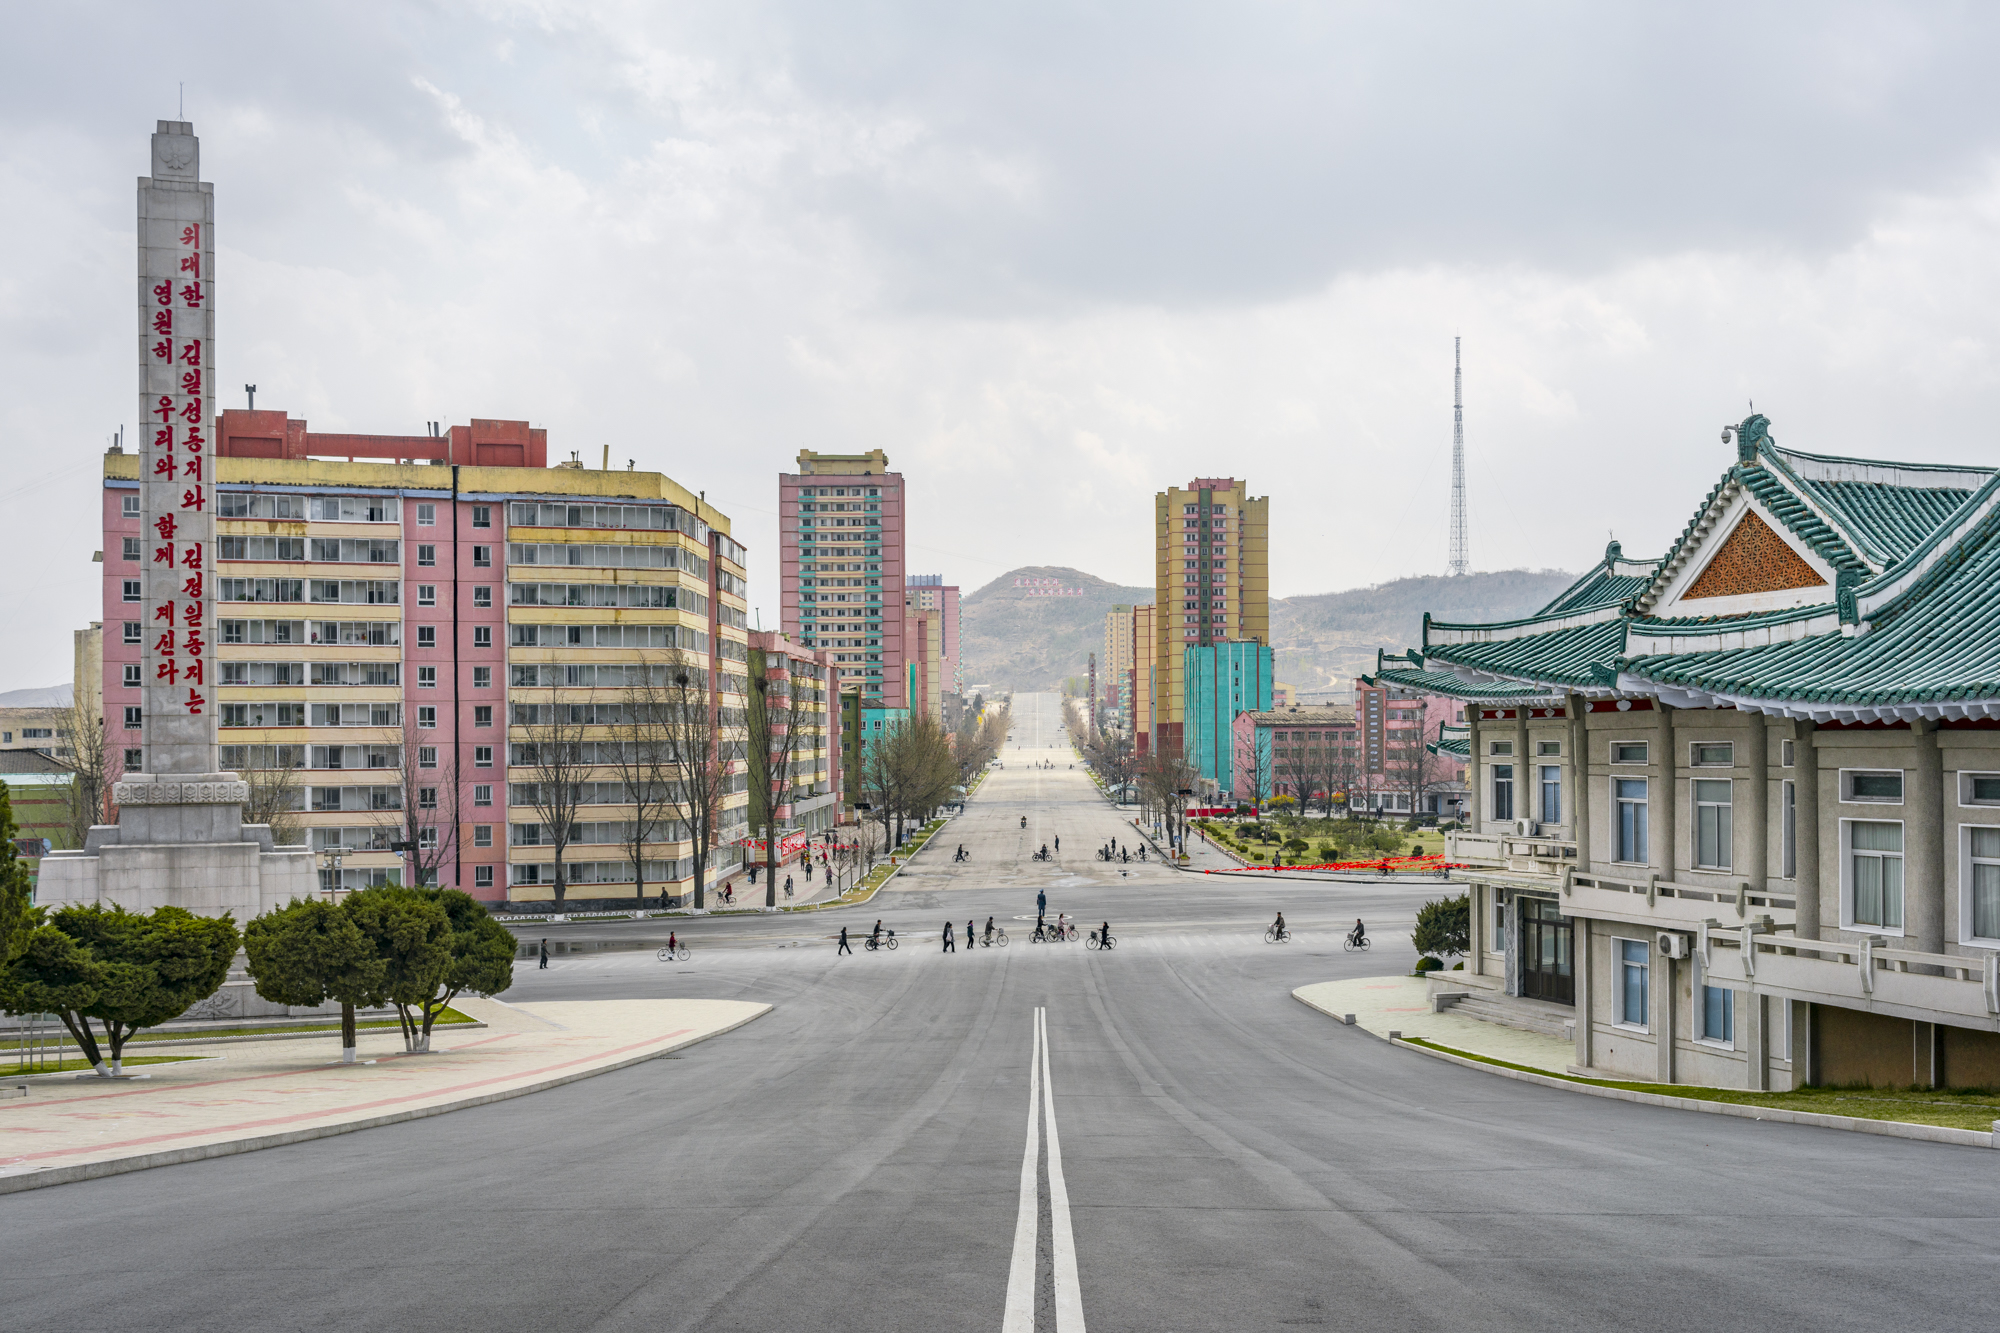  A street scene in Kaesŏng, North Hwanghae Province, the ancient capital of the Koryo Dynasty, North Pyongyang. On the left, the monument inspired by the  Juche  Tower. 